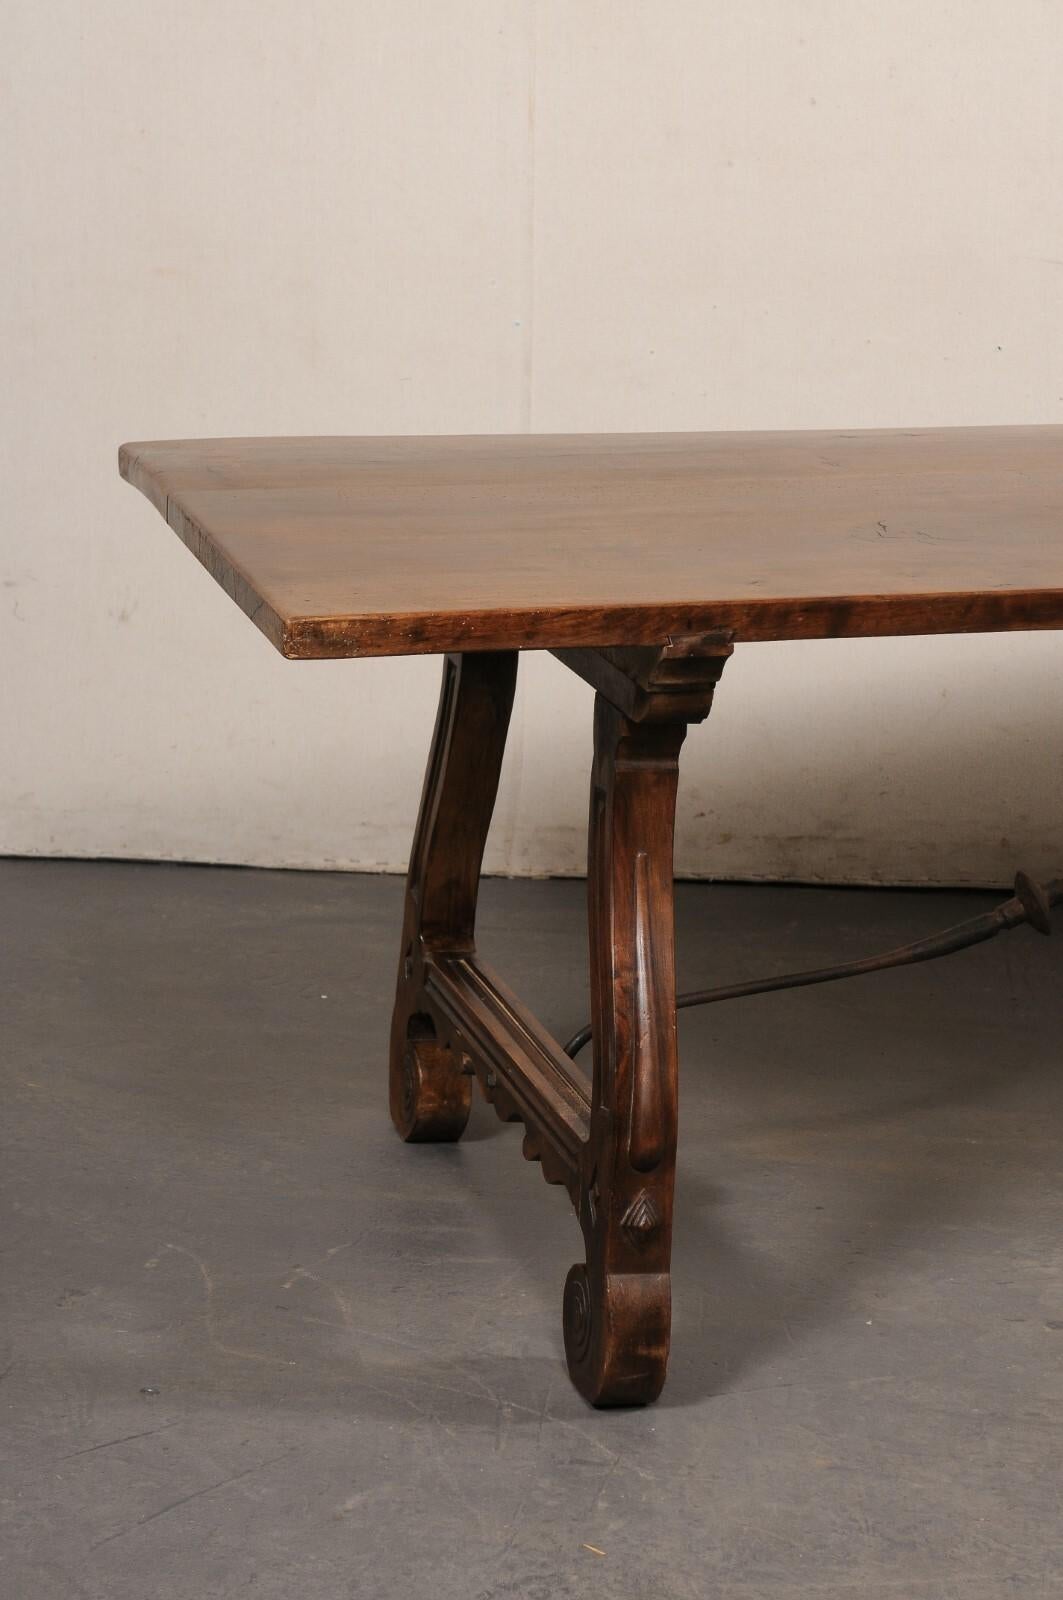 A gorgeous Spanish carved-walnut trestle table with iron stretcher from the mid 20th century. This vintage table from Spain features a rectangular shaped top, just over 8 feet in length, raised upon a pair of fluidly-carved trestle legs adorn with